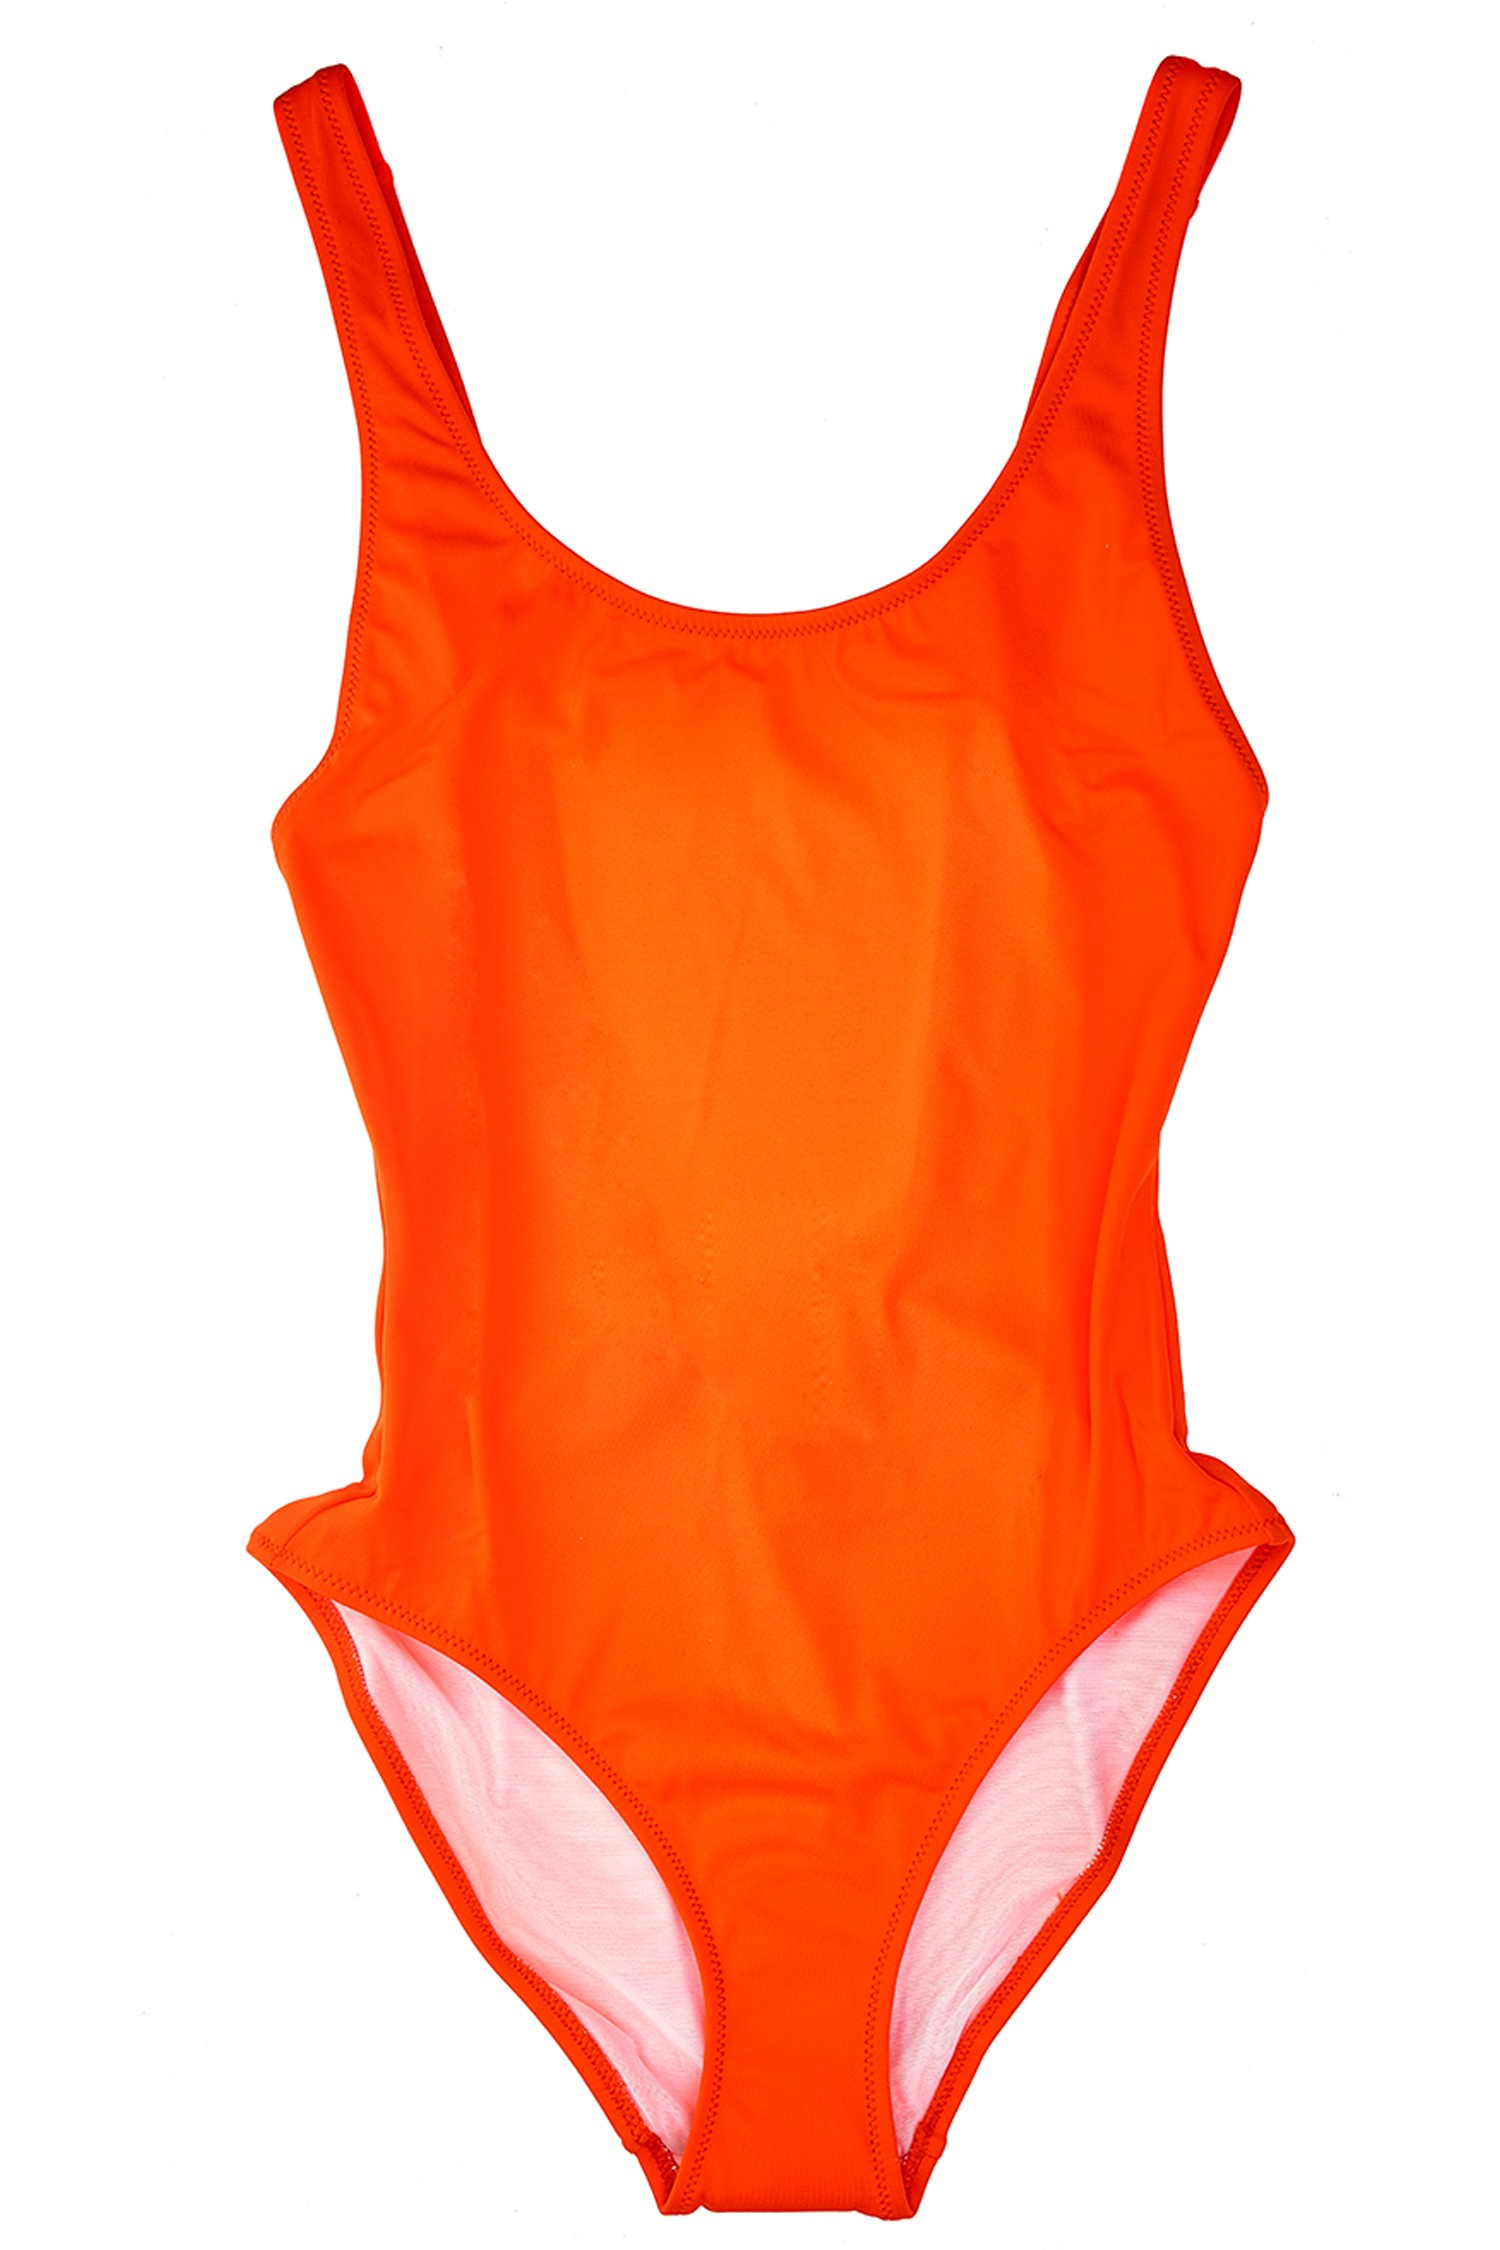 Lisa perry + Solid & Striped Bathing Suit in Orange | Lyst